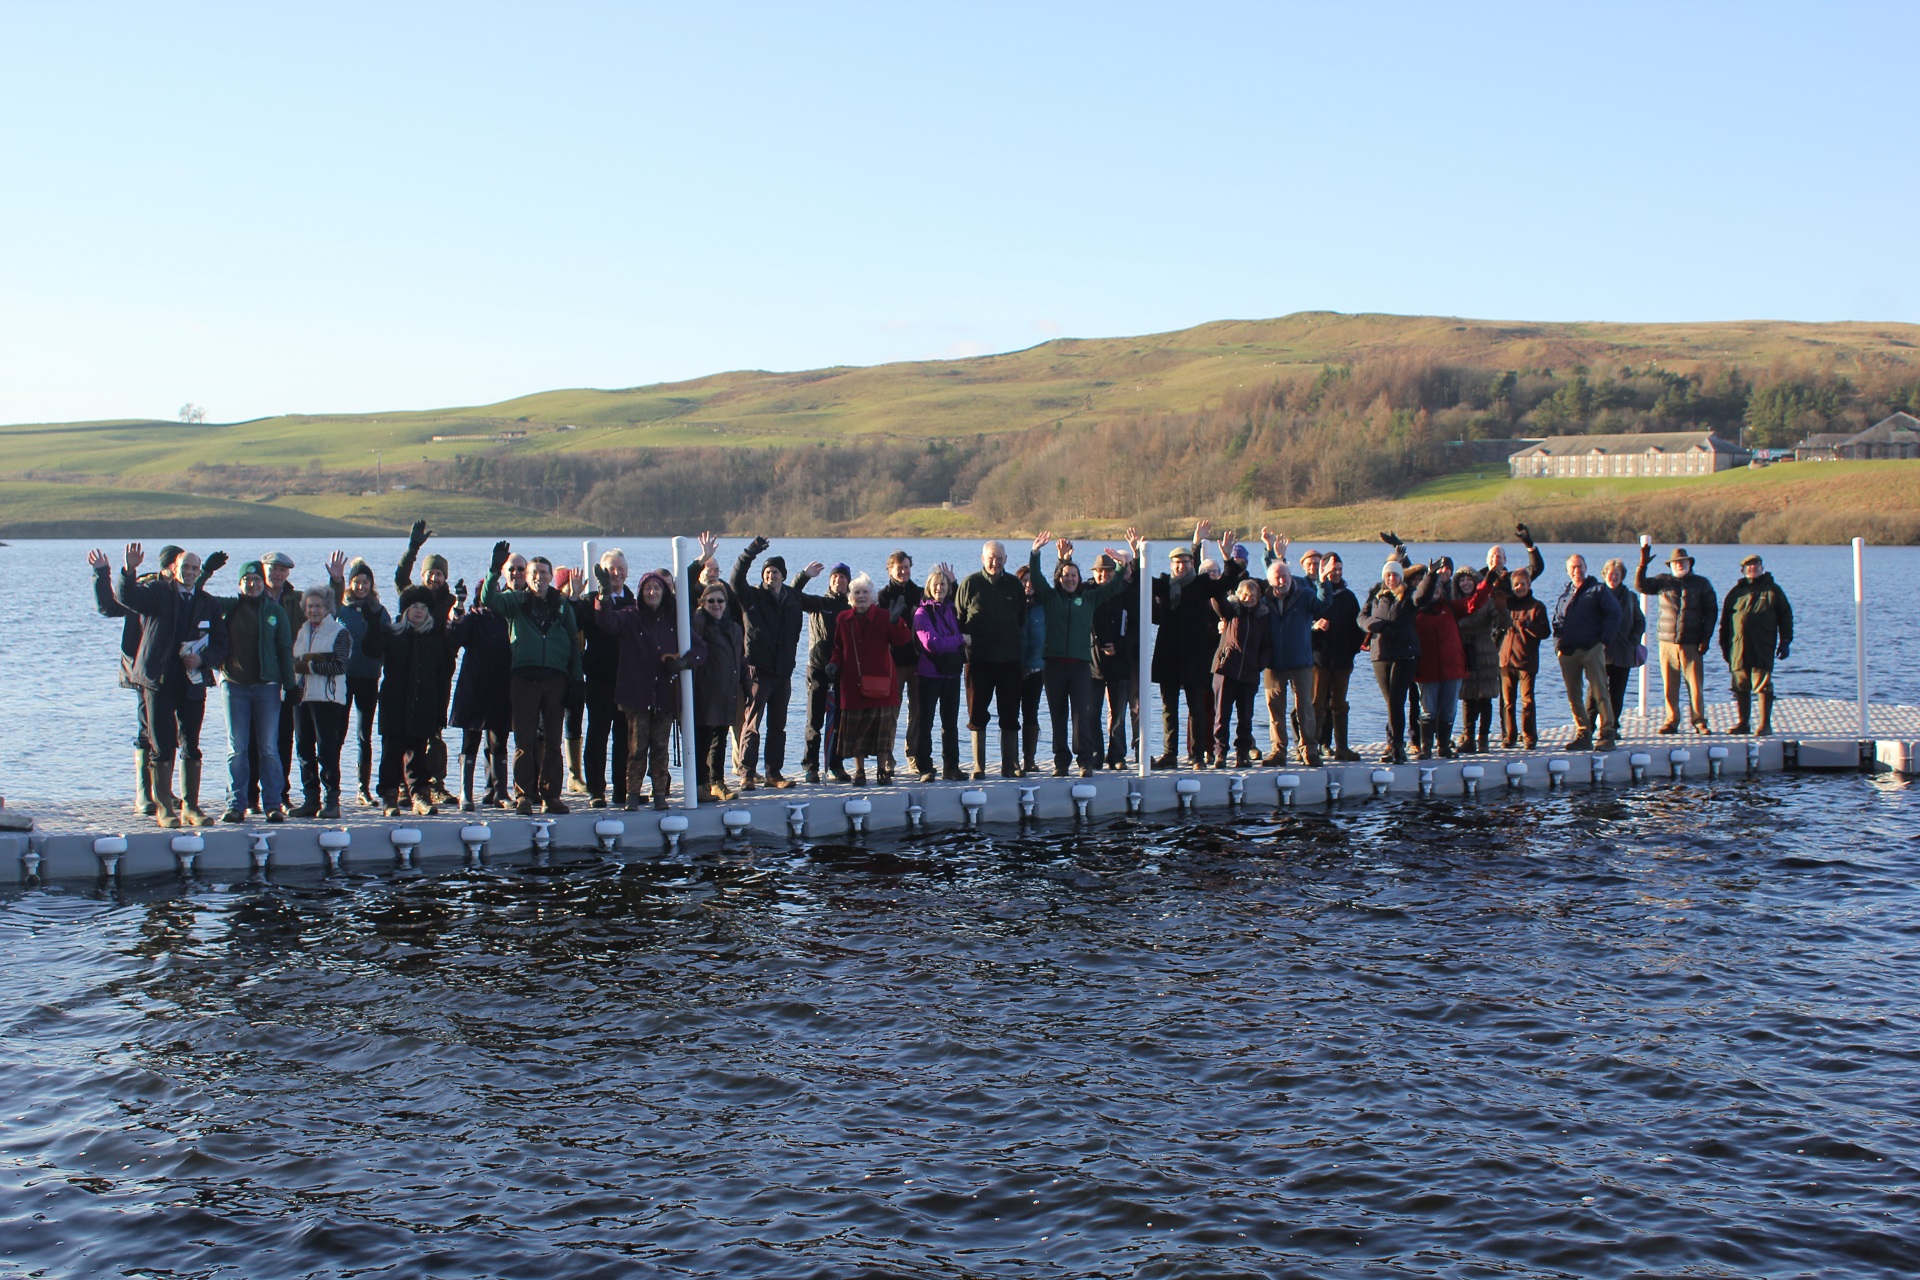 Members of Community Energy Cumbria celebrate the official launch of their hydro scheme at Killington Reservoir